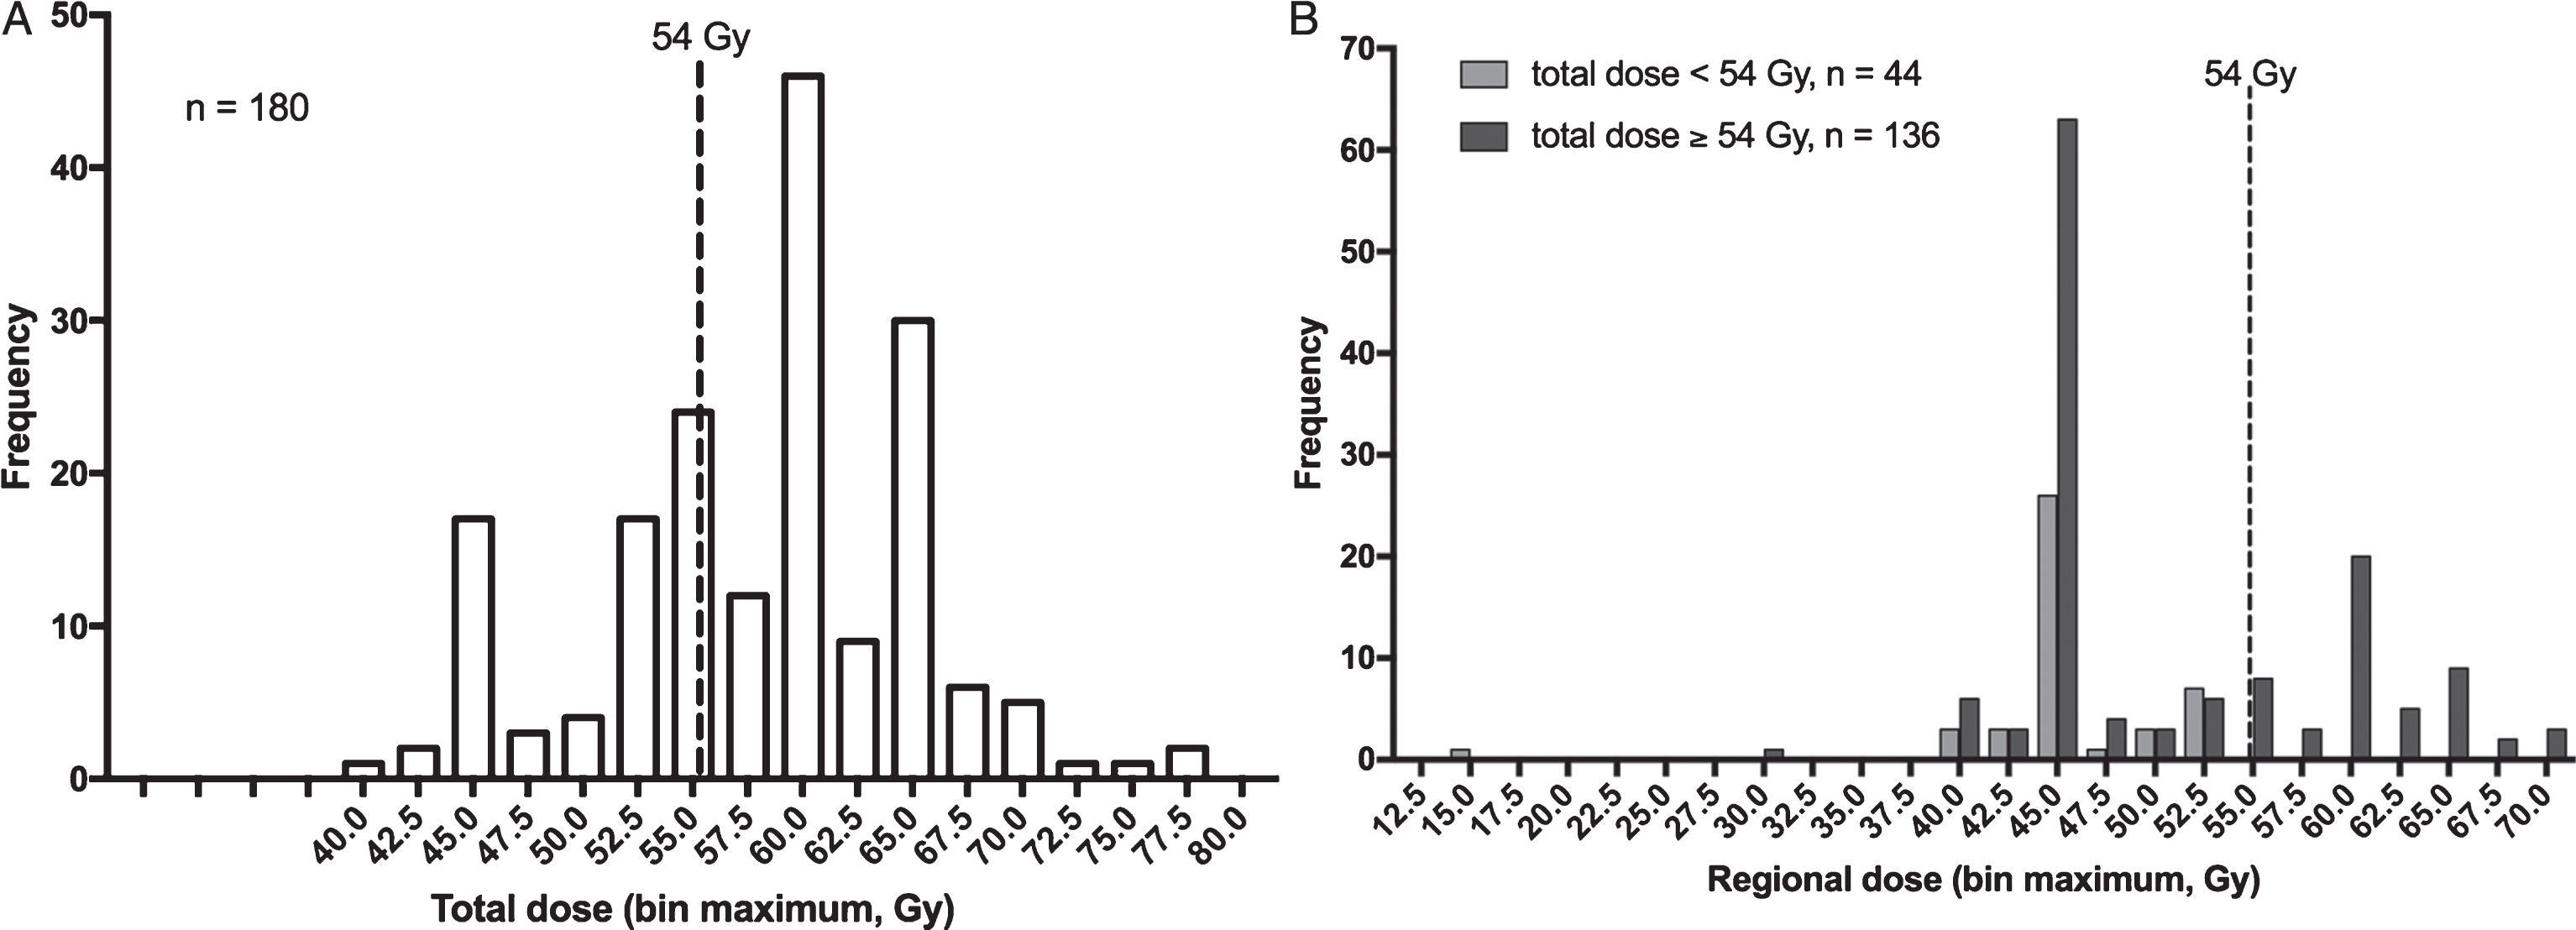 Distribution of delivered radiation doses. A. Histogram depicting the frequency of total radiation dose delivered. Most patients received a total dose between 45 and 64.8 Gy (range 40–77.4 Gy). B. Grouped histogram of regional dose delivered (before boost), segregated by total dose received.